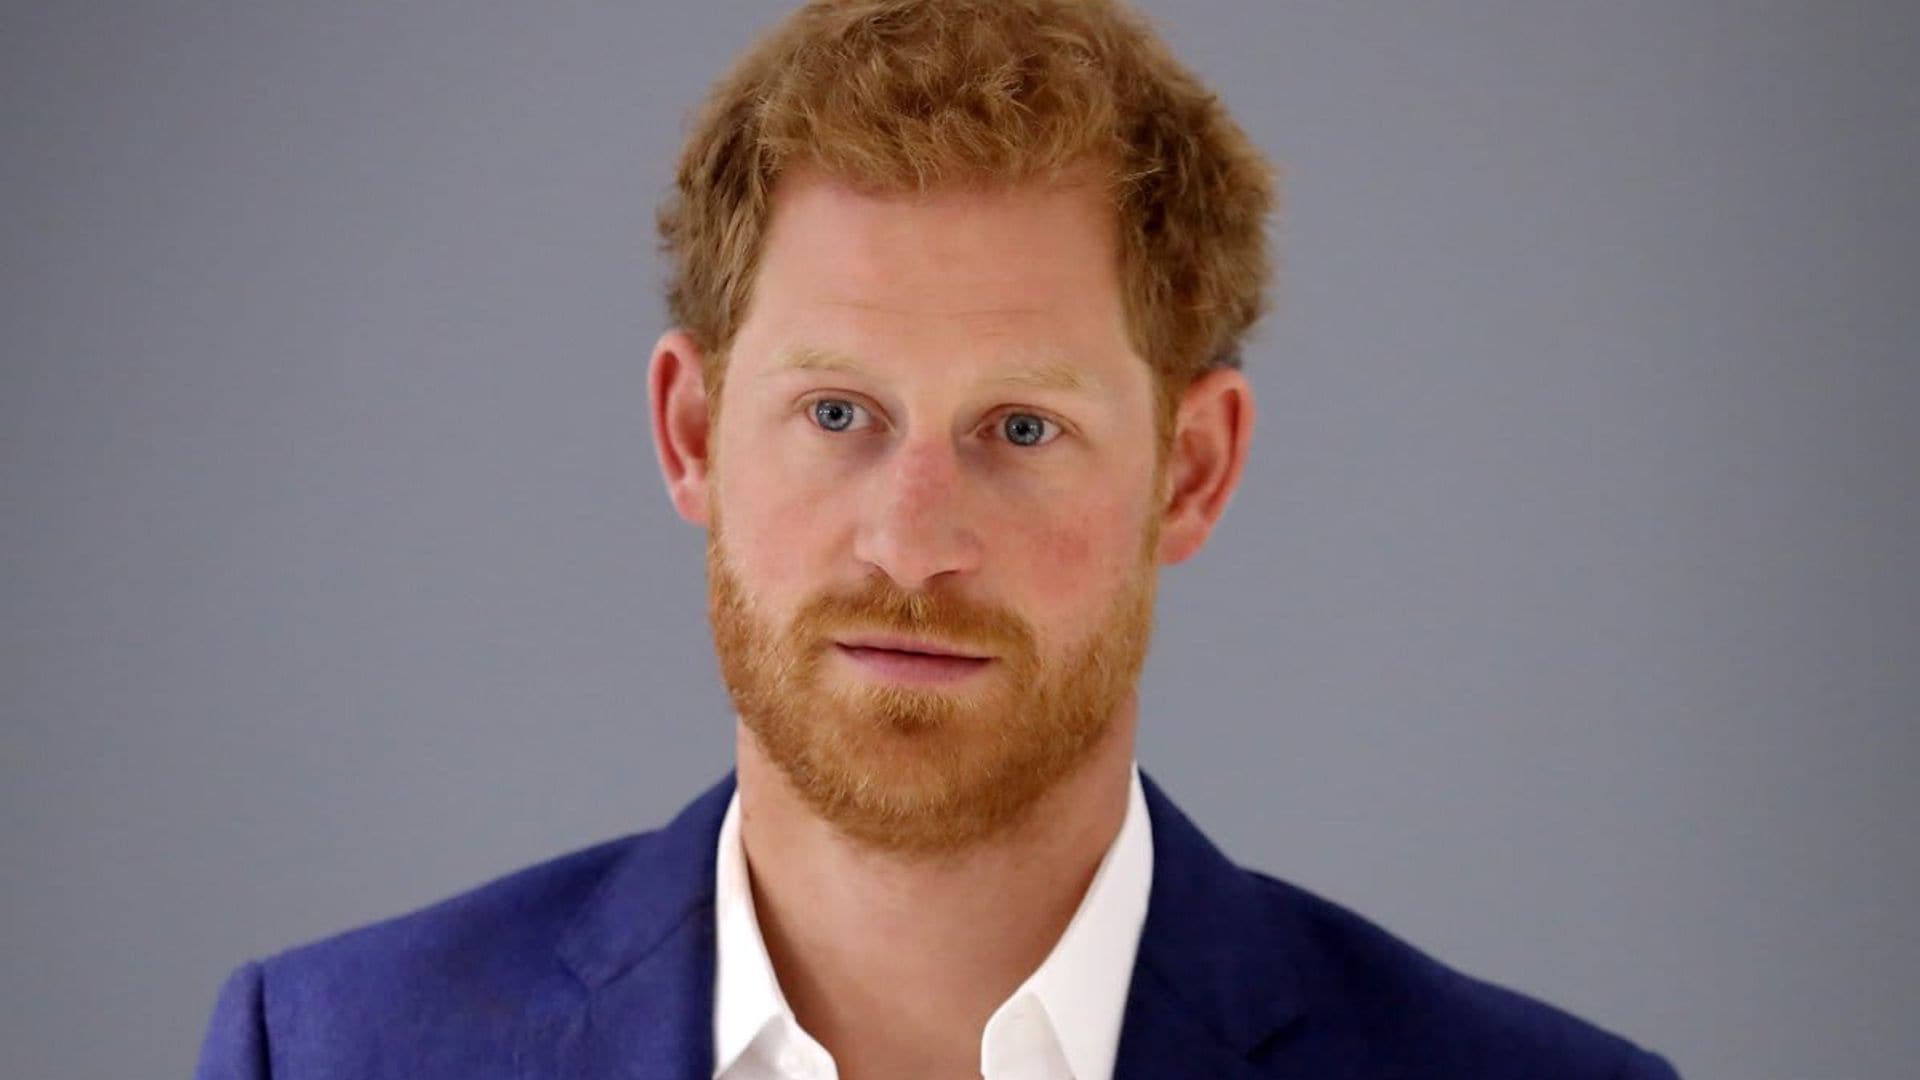 Prince Harry narrates new video featuring footage of mom Princess Diana and wife Meghan Markle